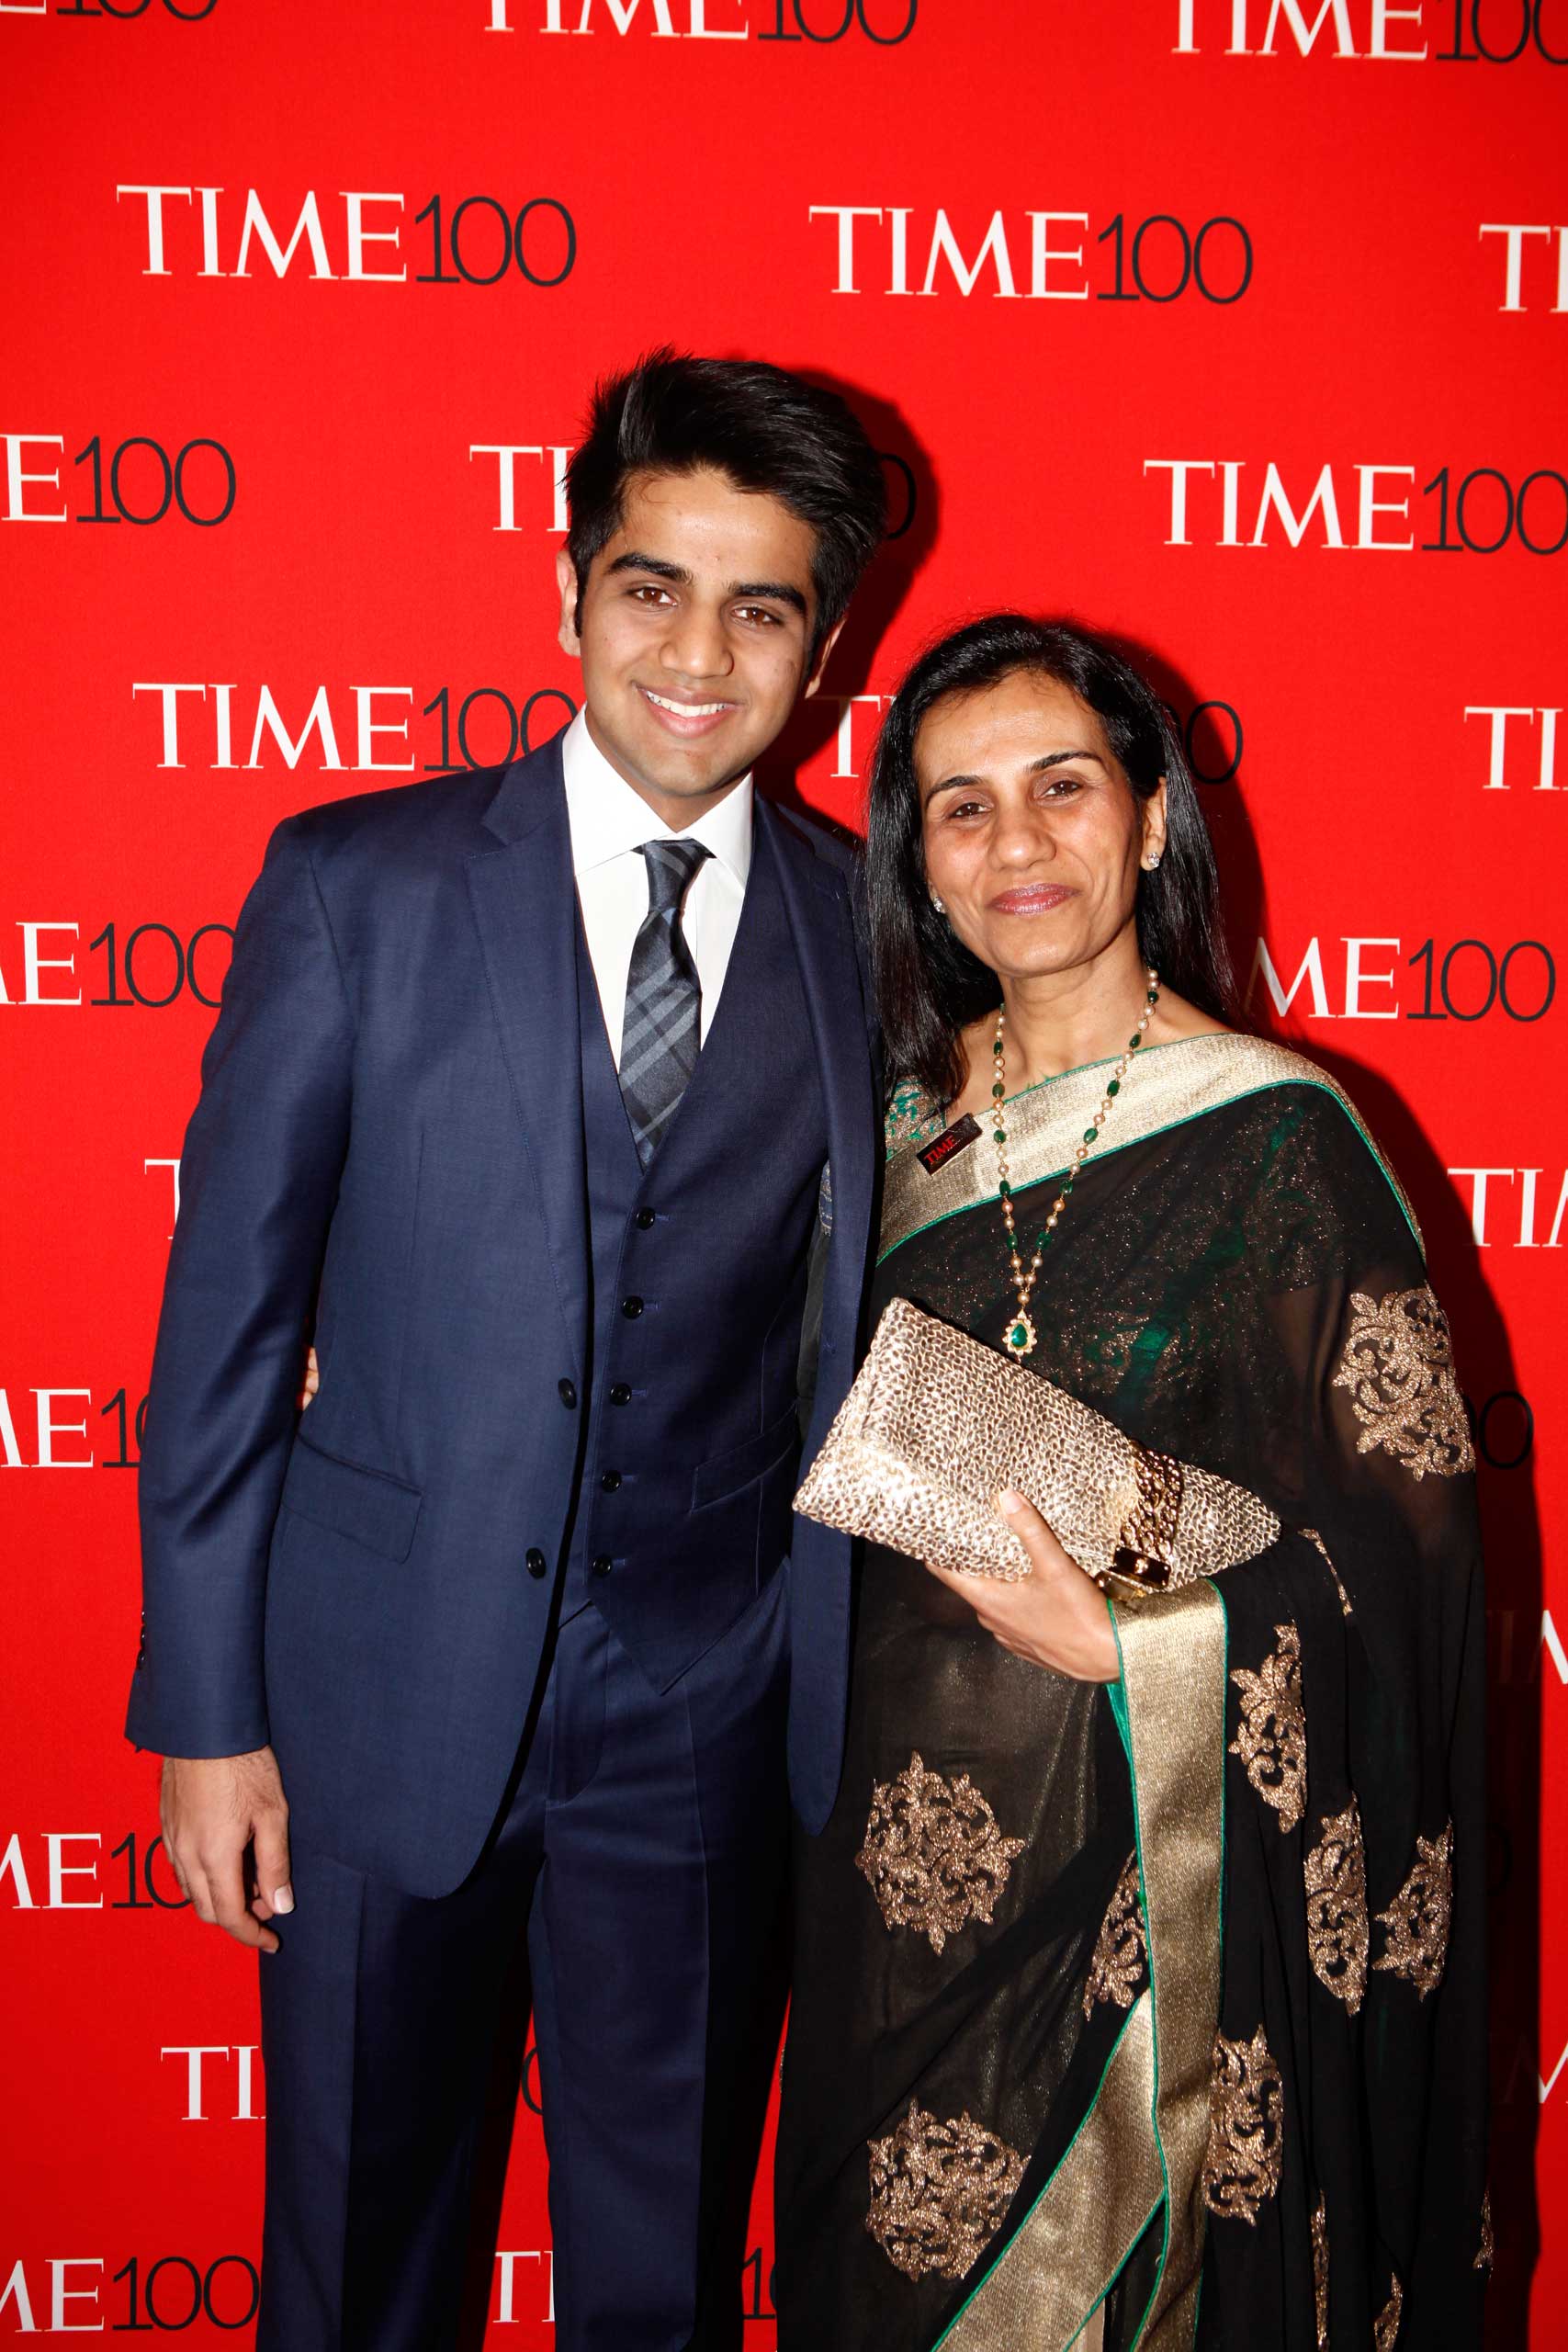 Chanda Kochhar attends the TIME 100 Gala at Lincoln Center in New York City on Apr. 21, 2015.